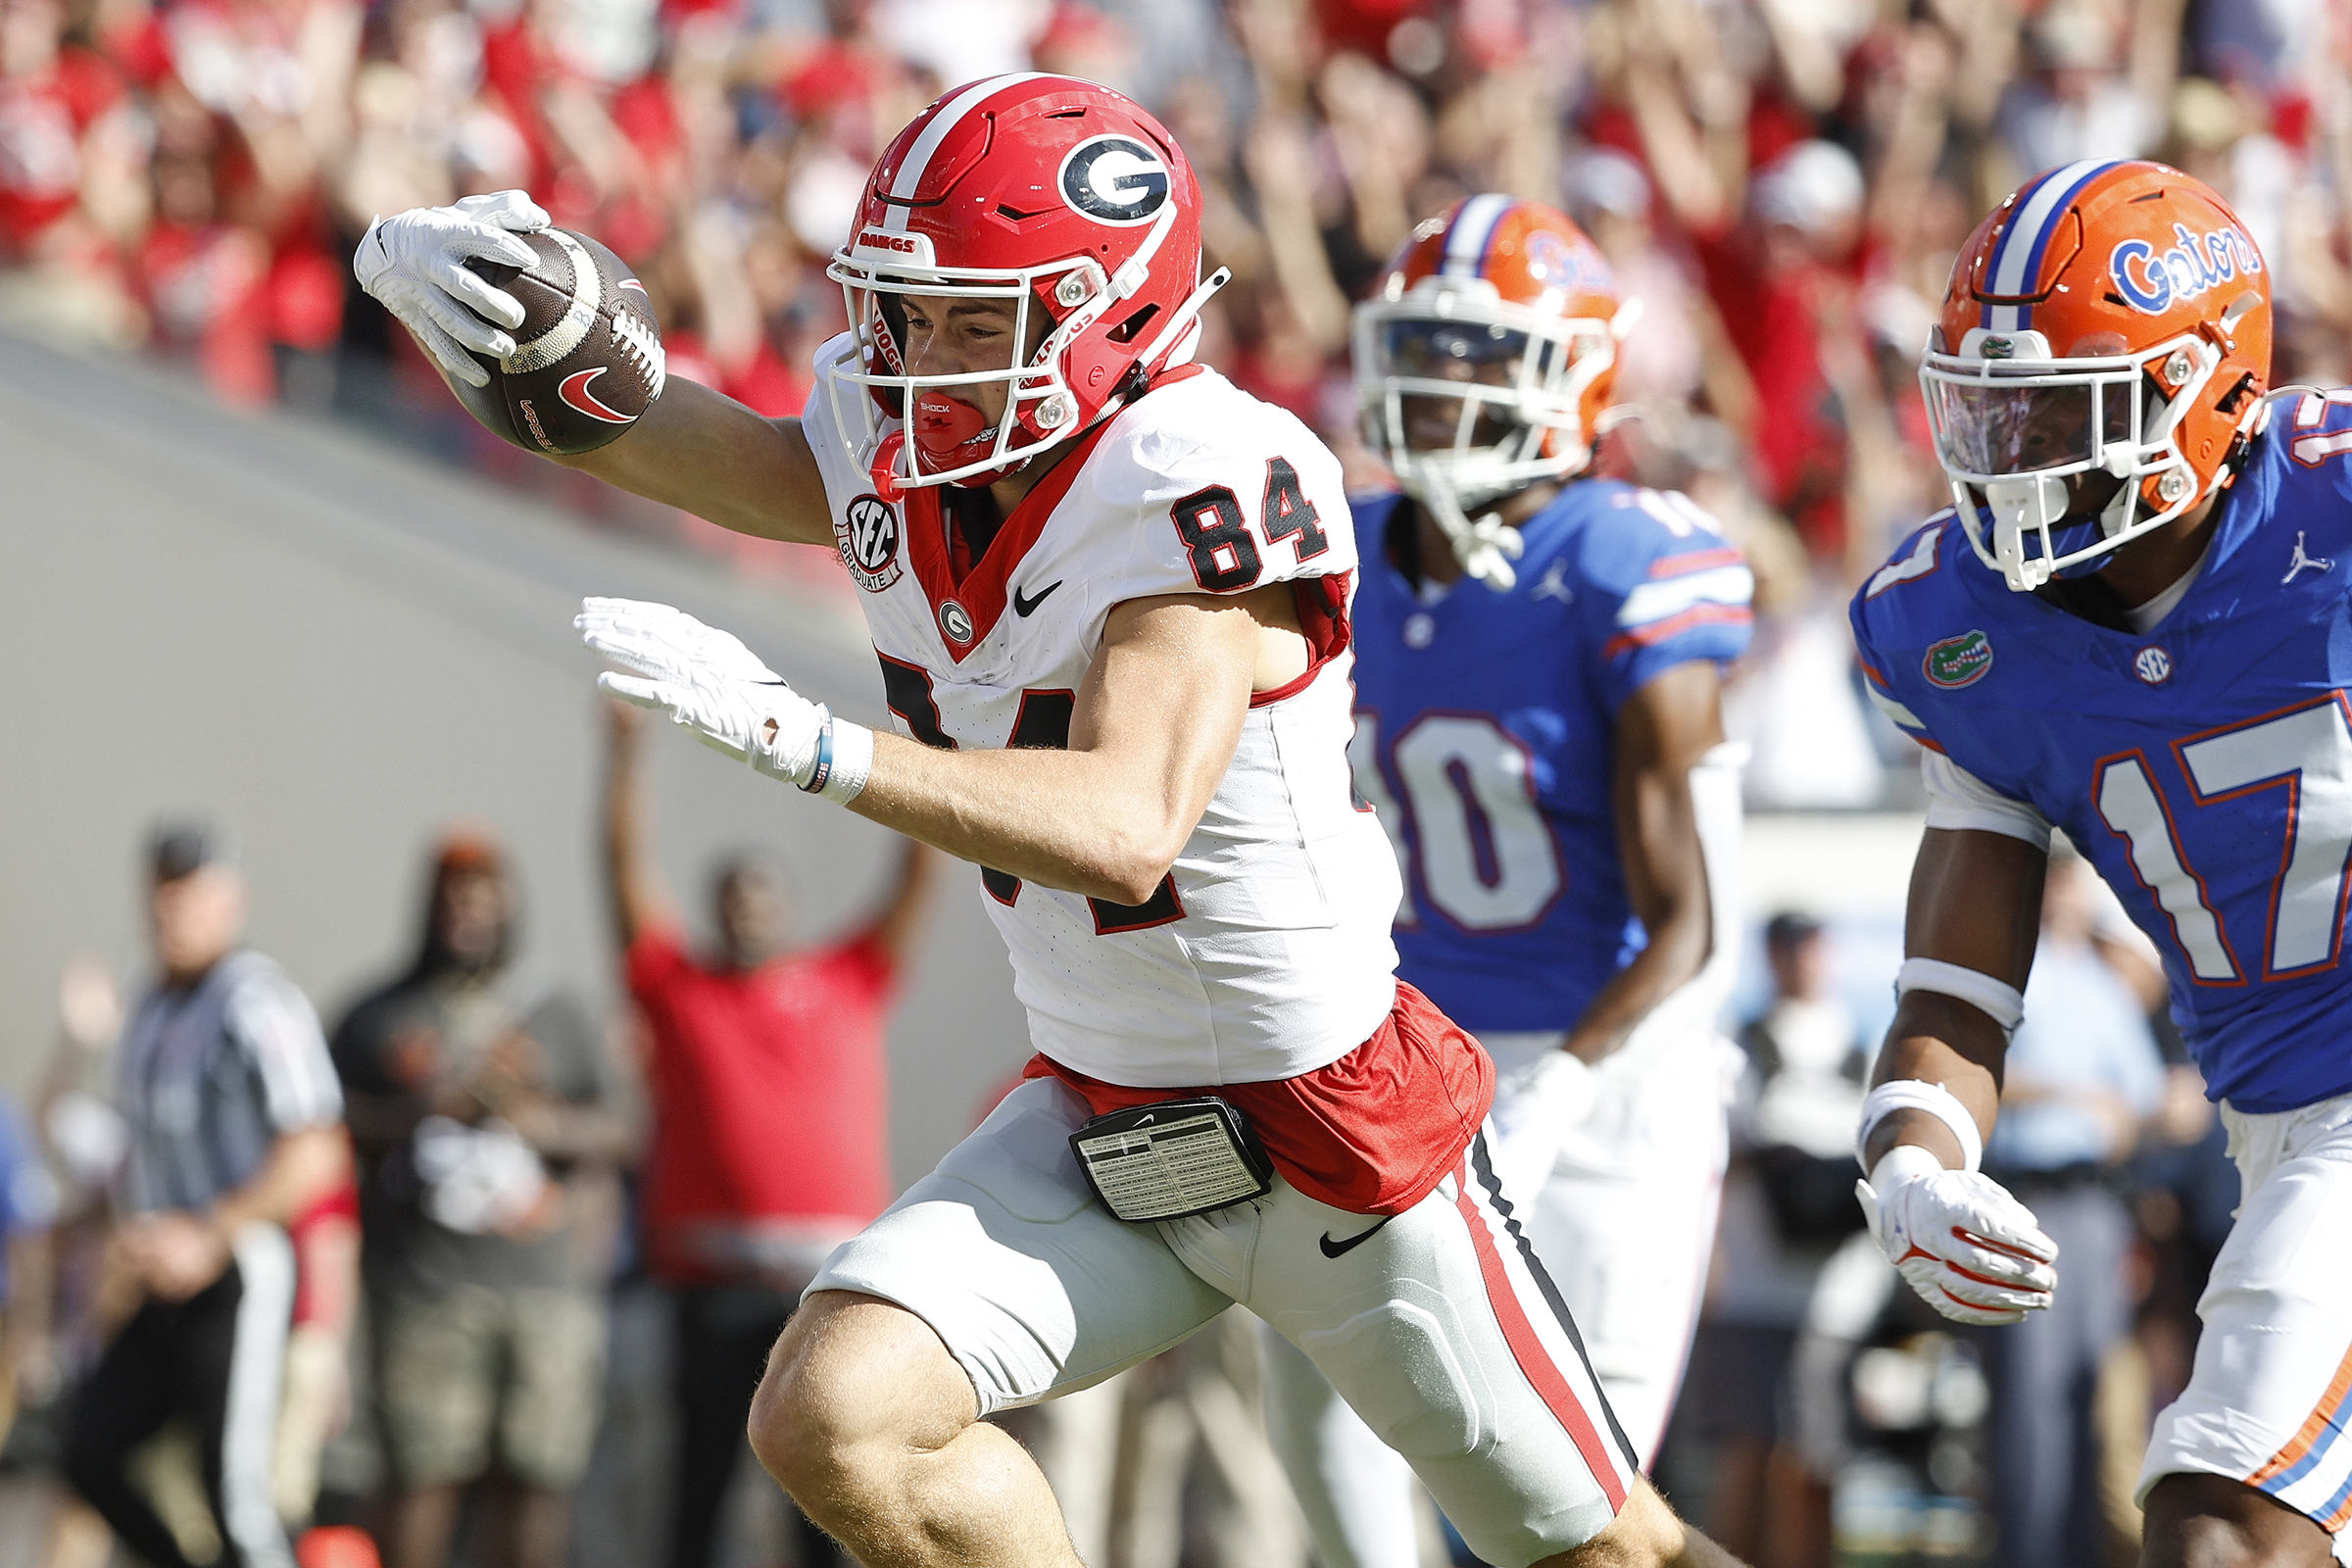 Georgia Bulldogs wide receiver Ladd McConkey (84) stretches for a touchdown past Florida Gators linebacker Scooby Williams (17) in the first half at EverBank Stadium.